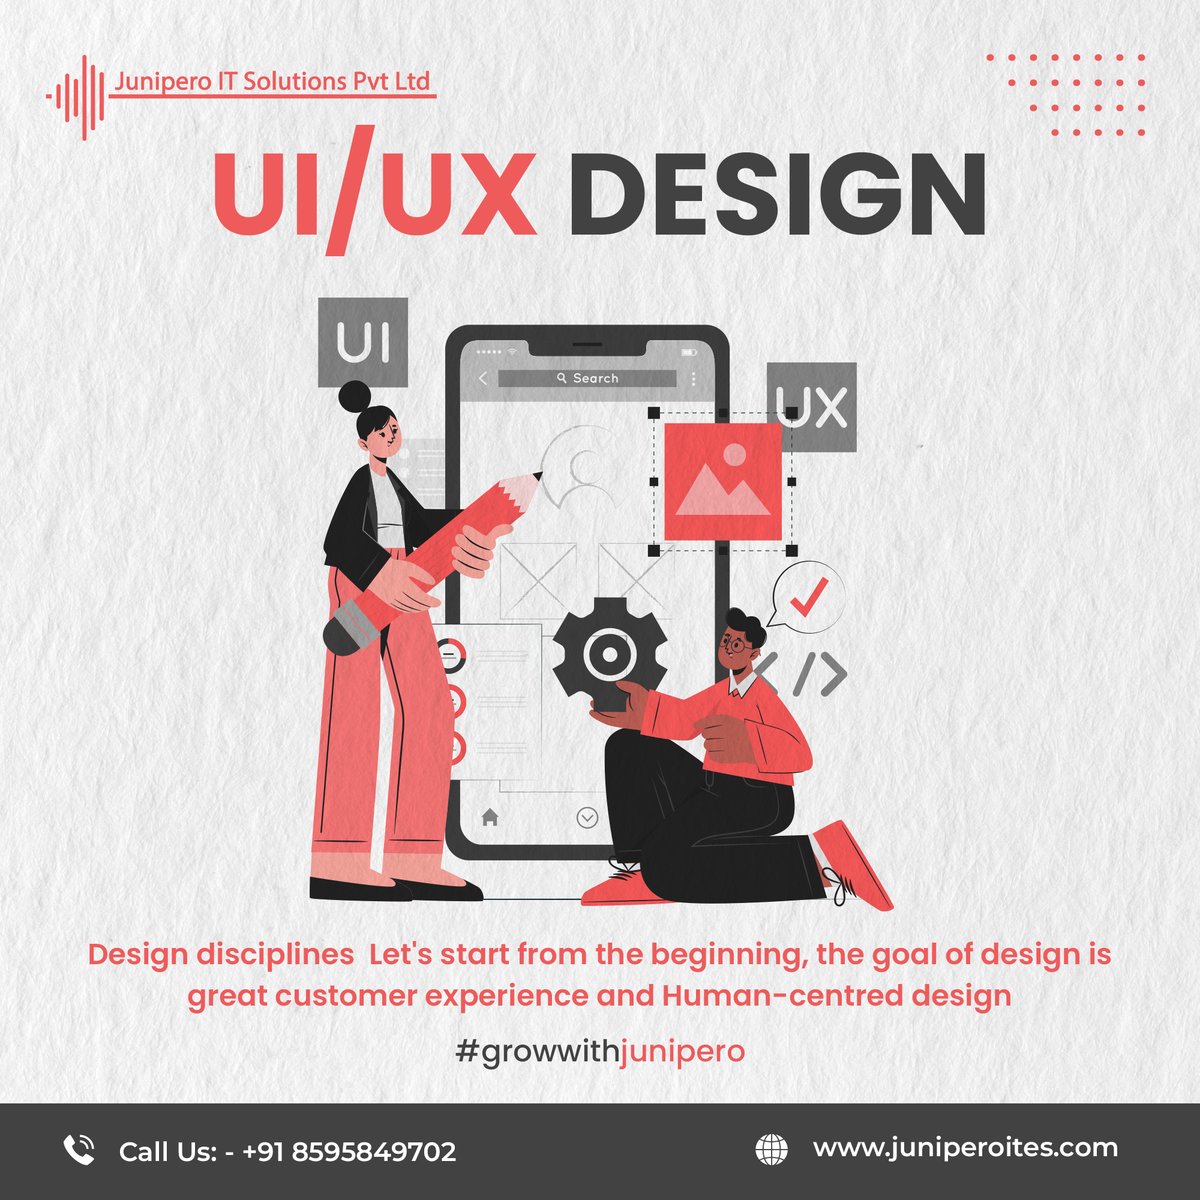 Design disciplines Let's start from the beginning, the goal of design is great customer experience and Human-centred design.
-
-
-
#growwithjunipero #uiux #ui #uidesign #ux #uxdesign #webdesign #design #userinterface #appdesign #uiuxdesign